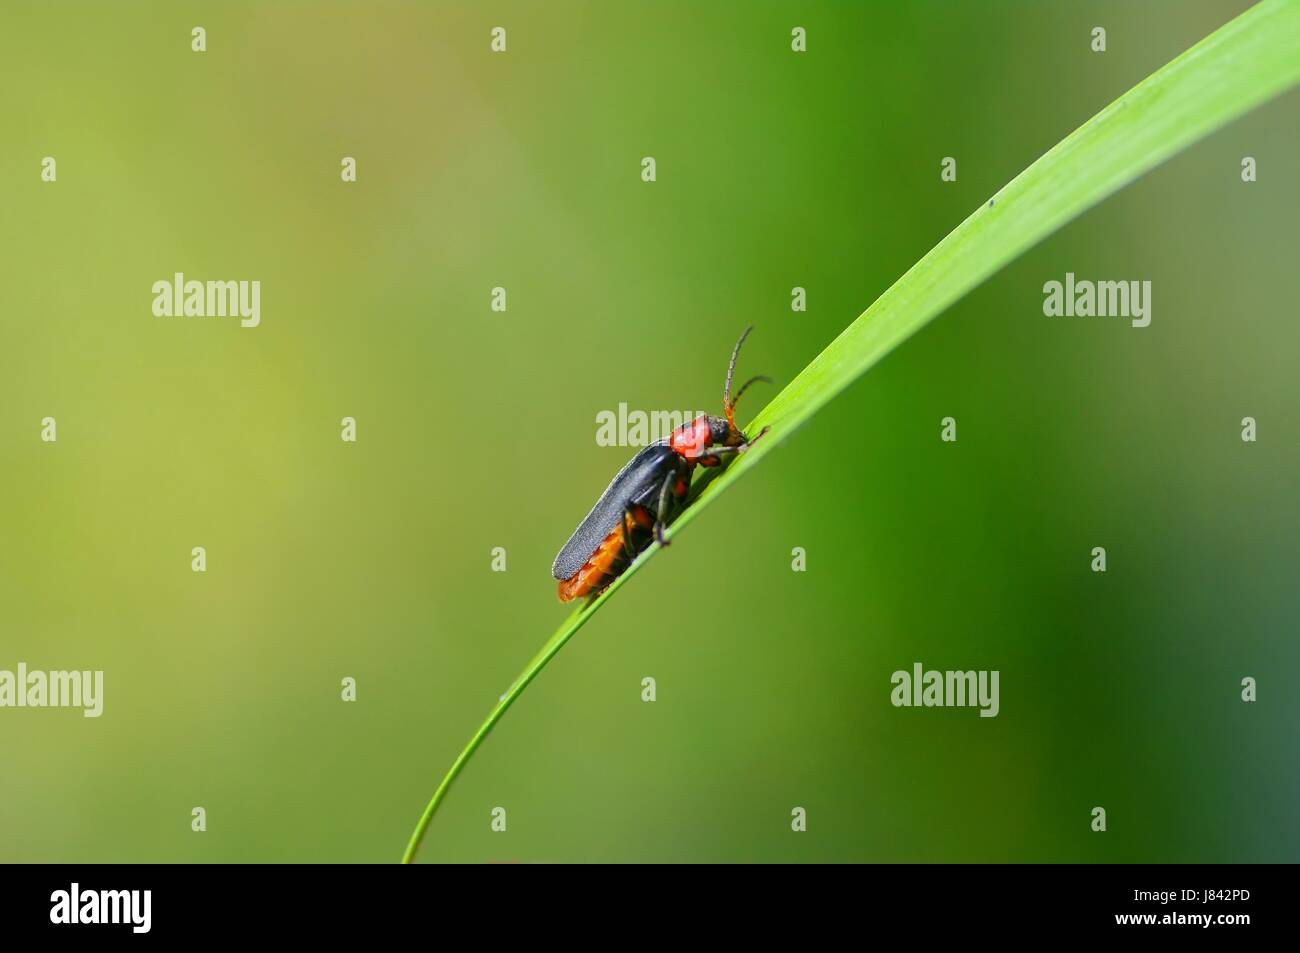 macro close-up macro admission close up view animal insect beetle rise climb Stock Photo